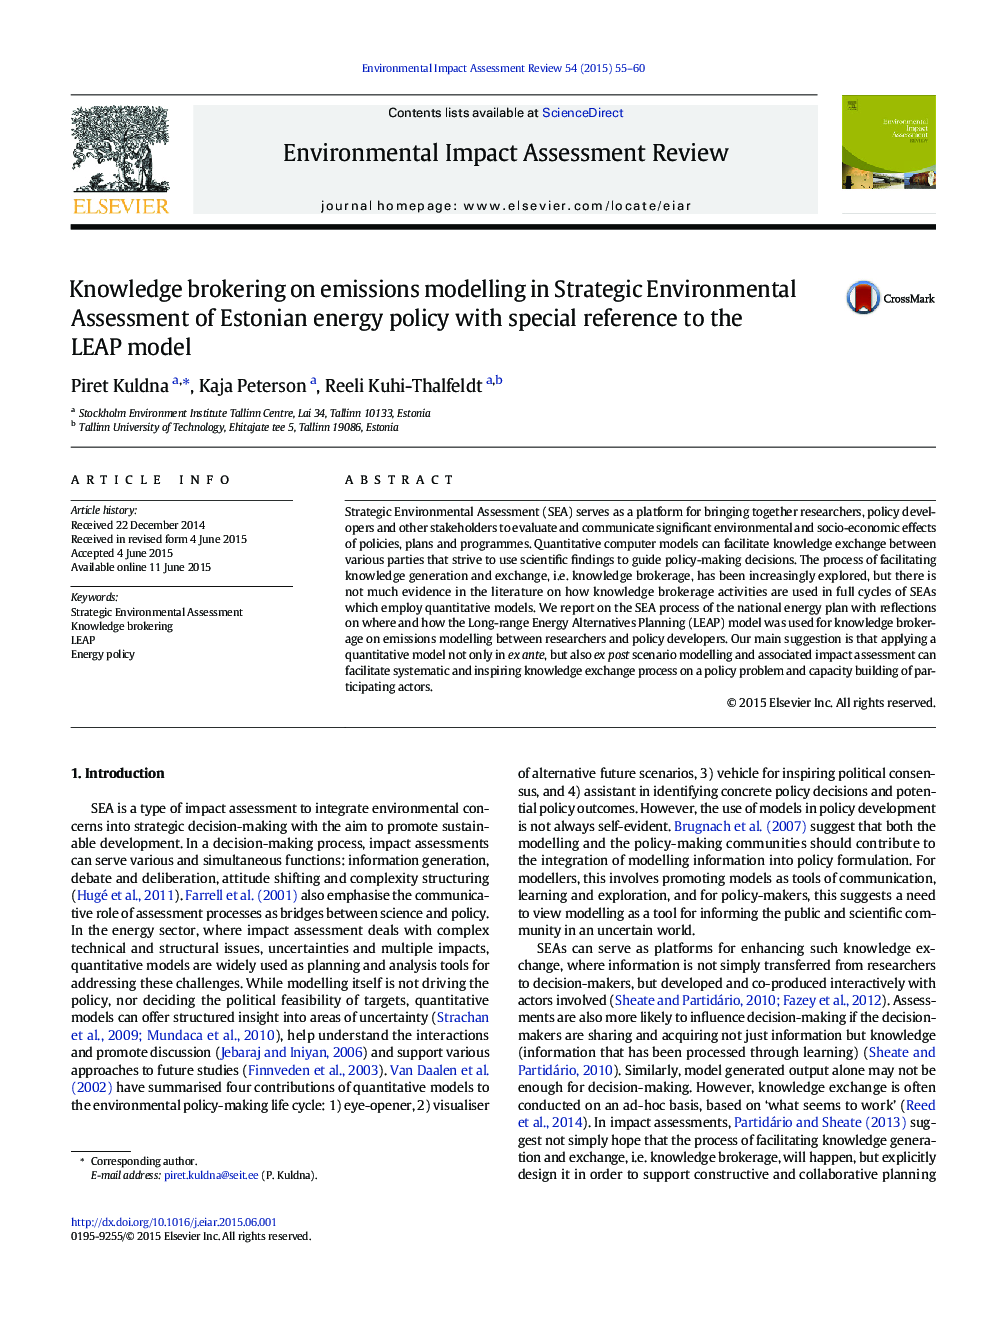 Knowledge brokering on emissions modelling in Strategic Environmental Assessment of Estonian energy policy with special reference to the LEAP model